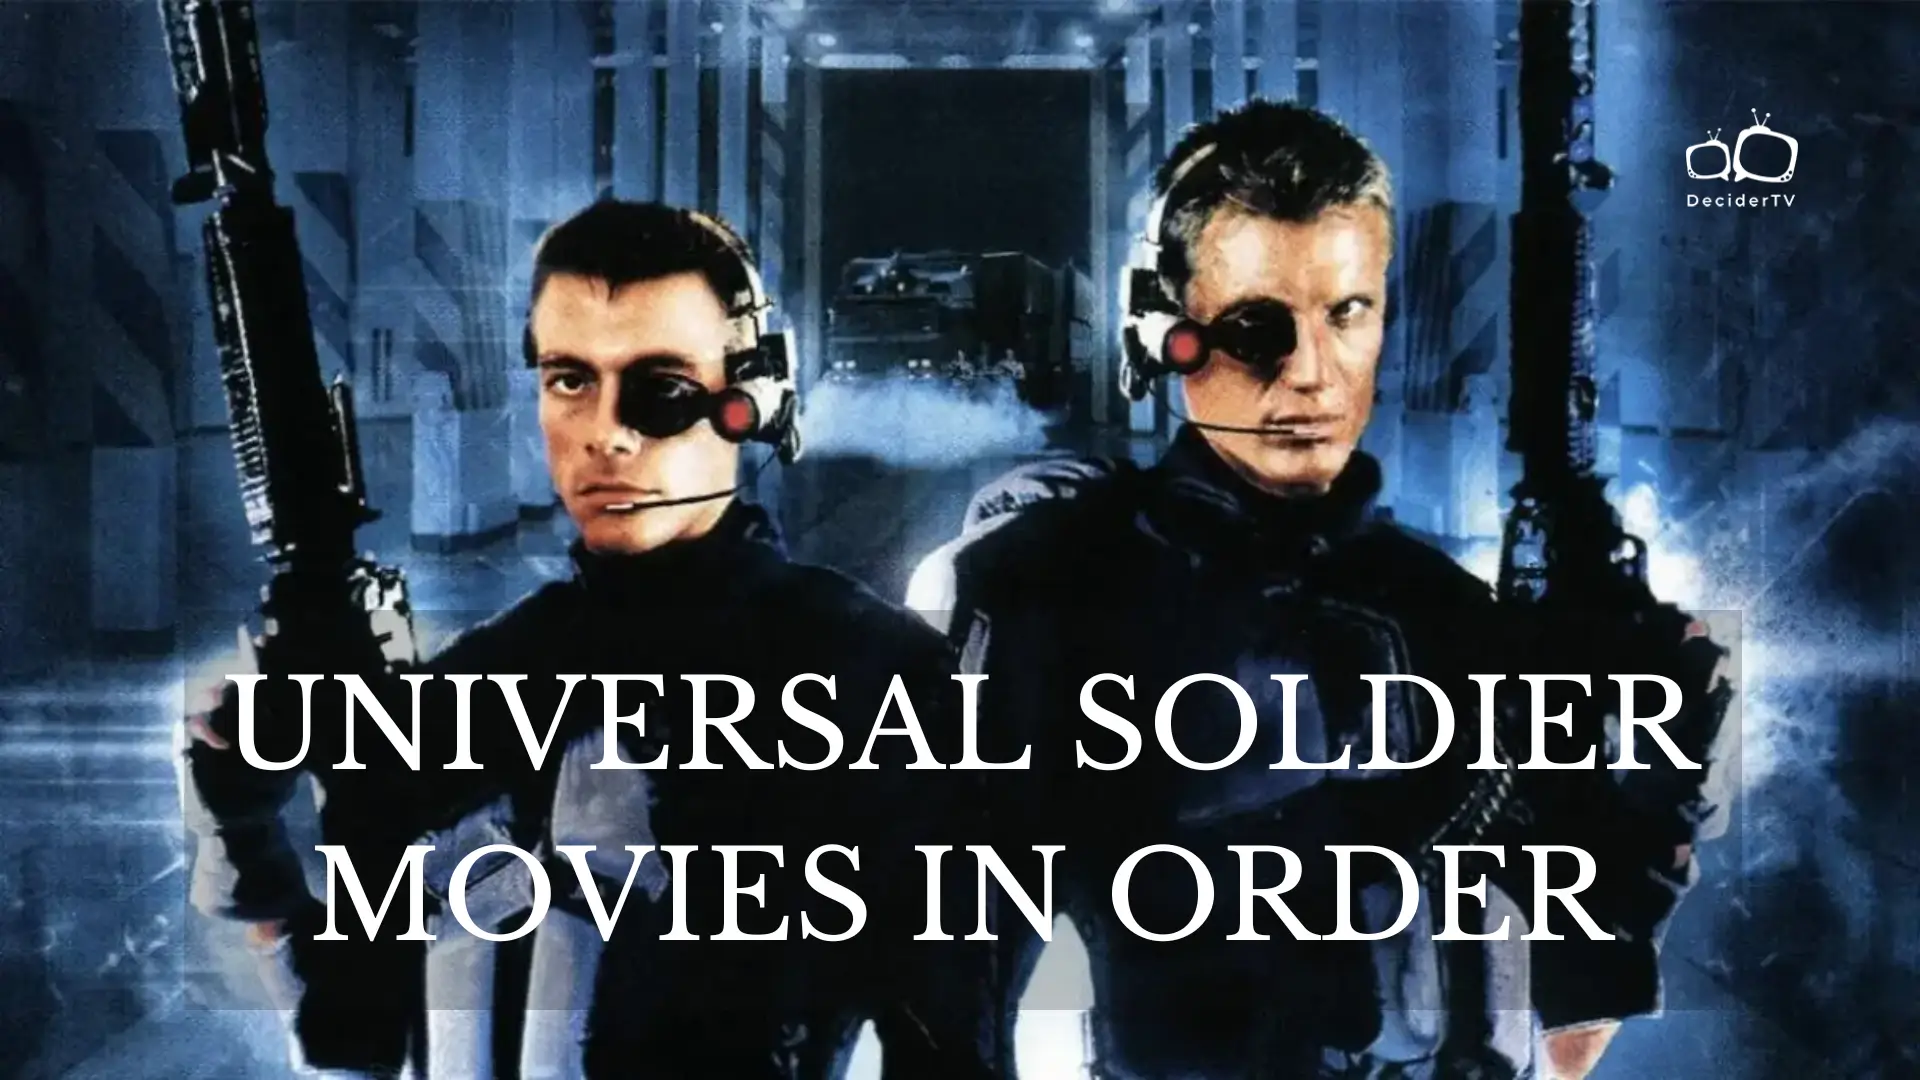 Universal Soldier Movies in Order